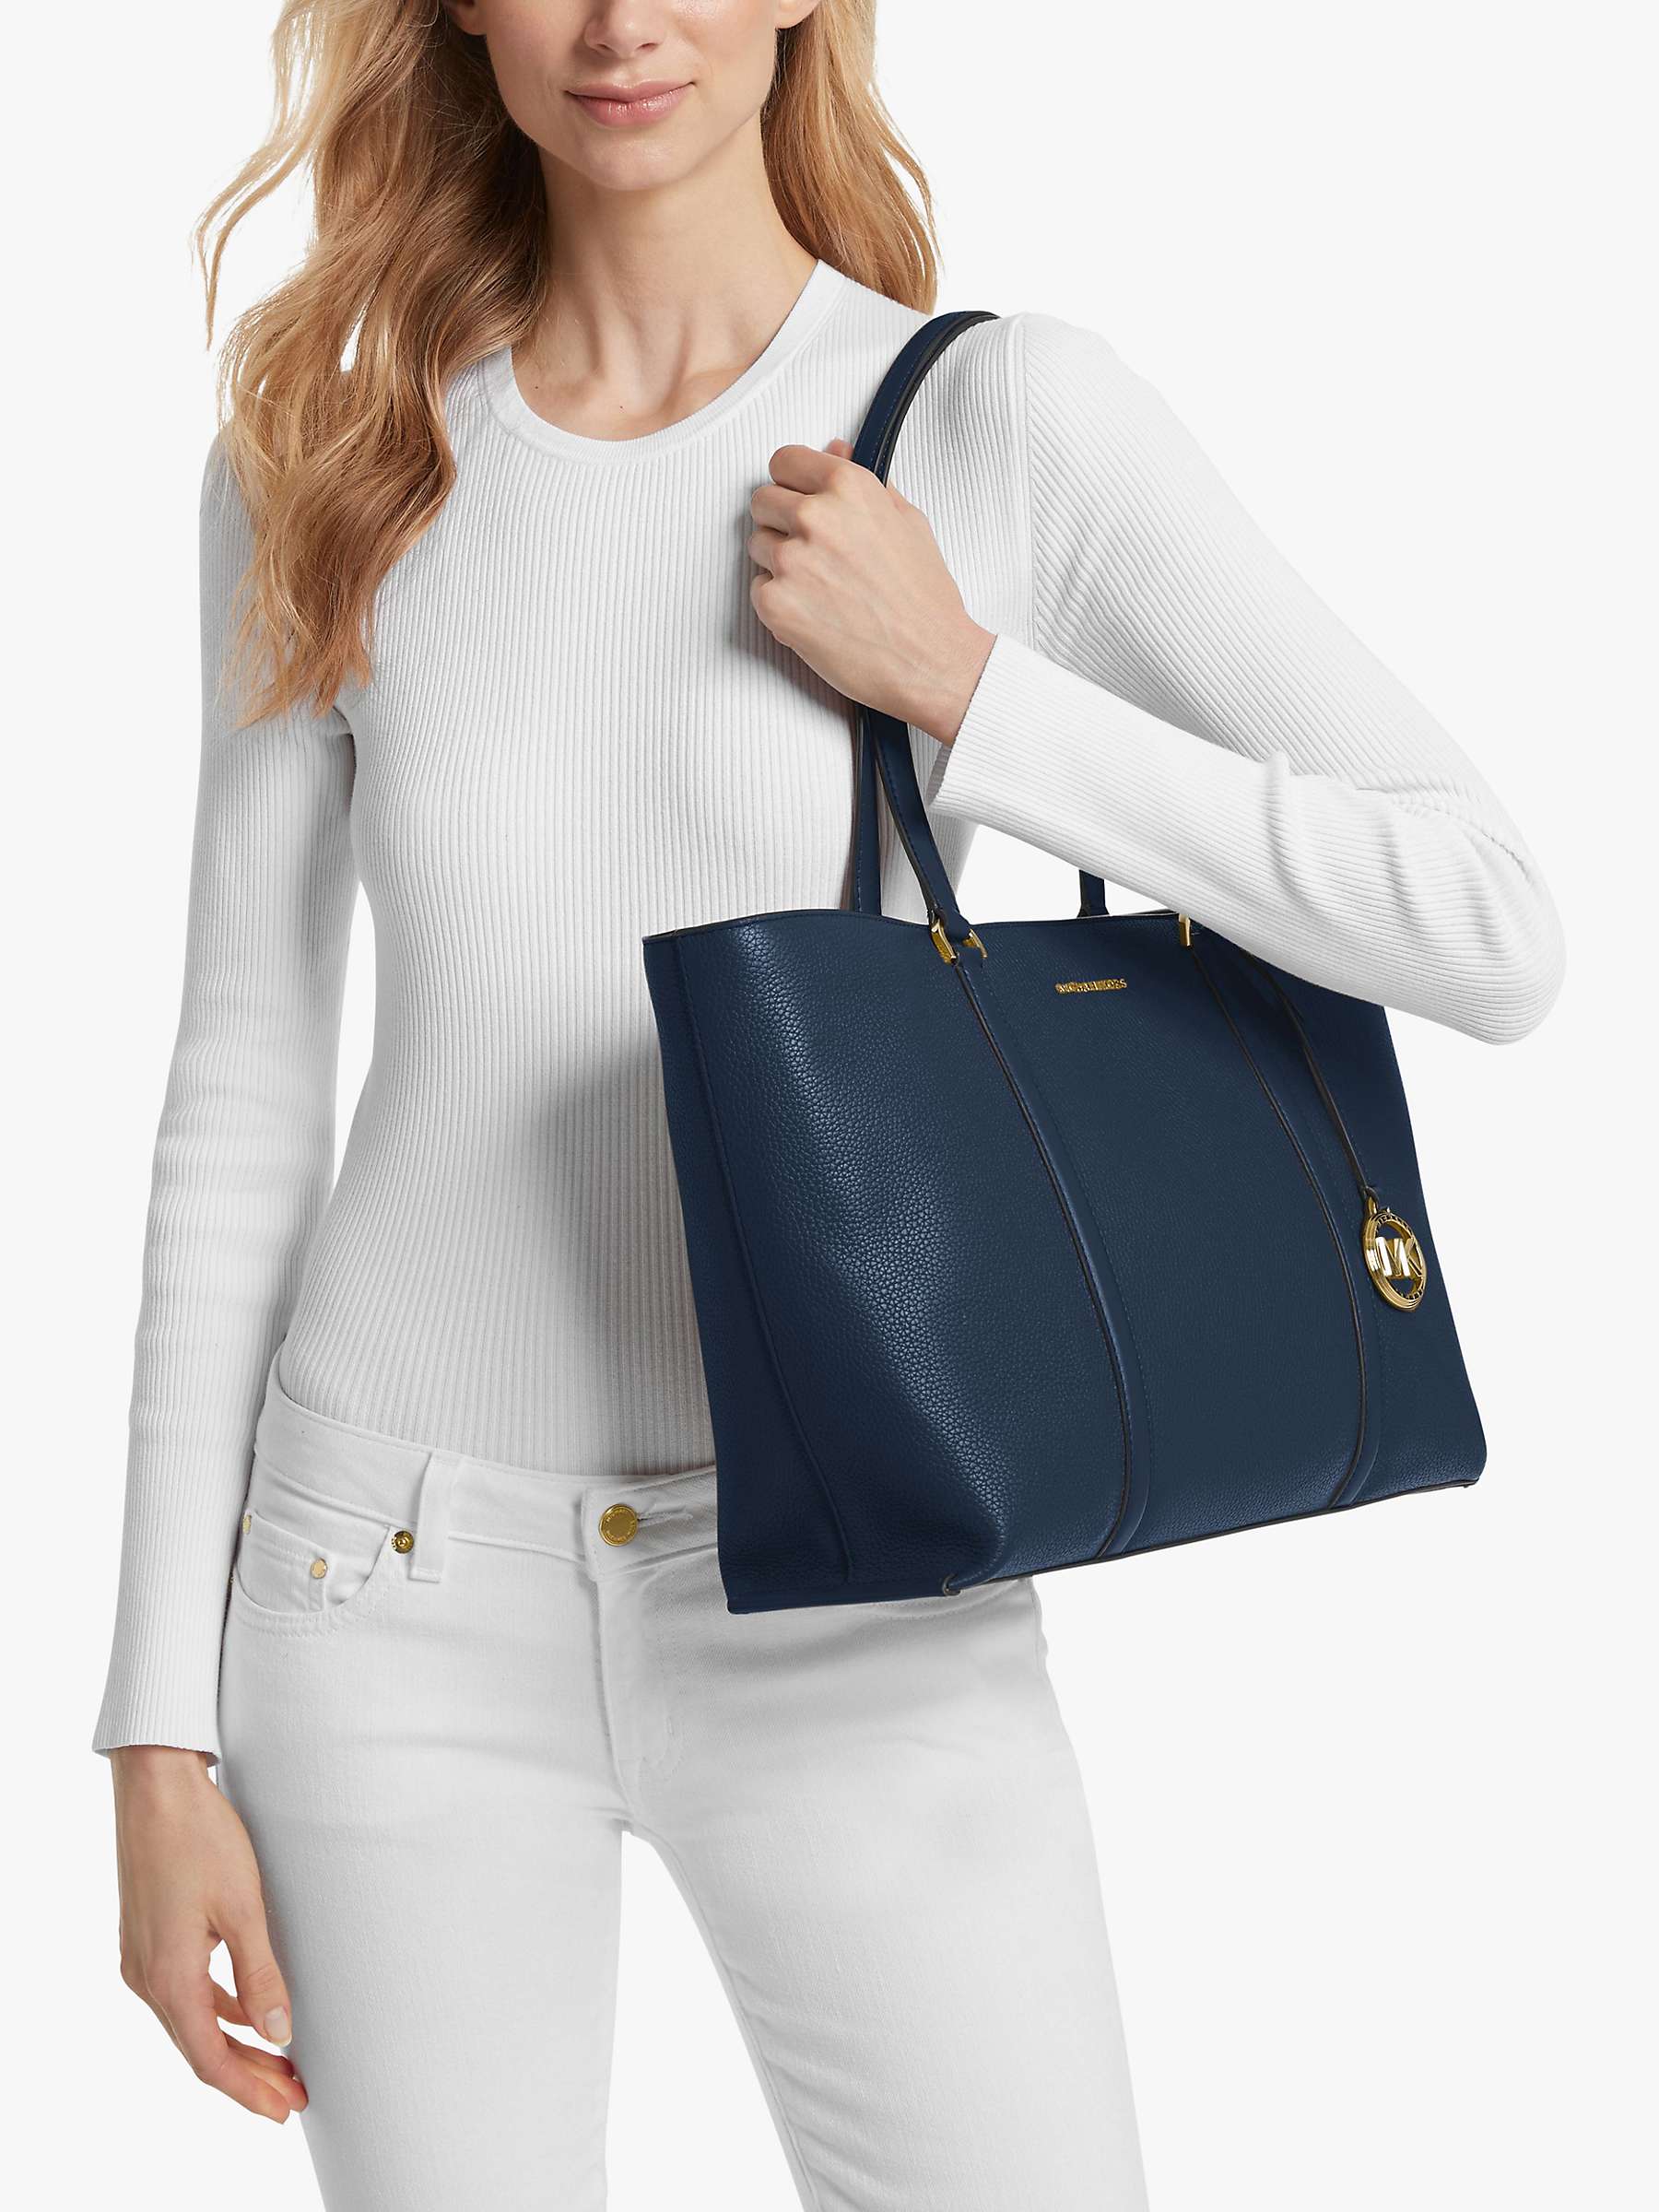 Michael Kors Temple Leather Tote Bag, Navy at John Lewis & Partners